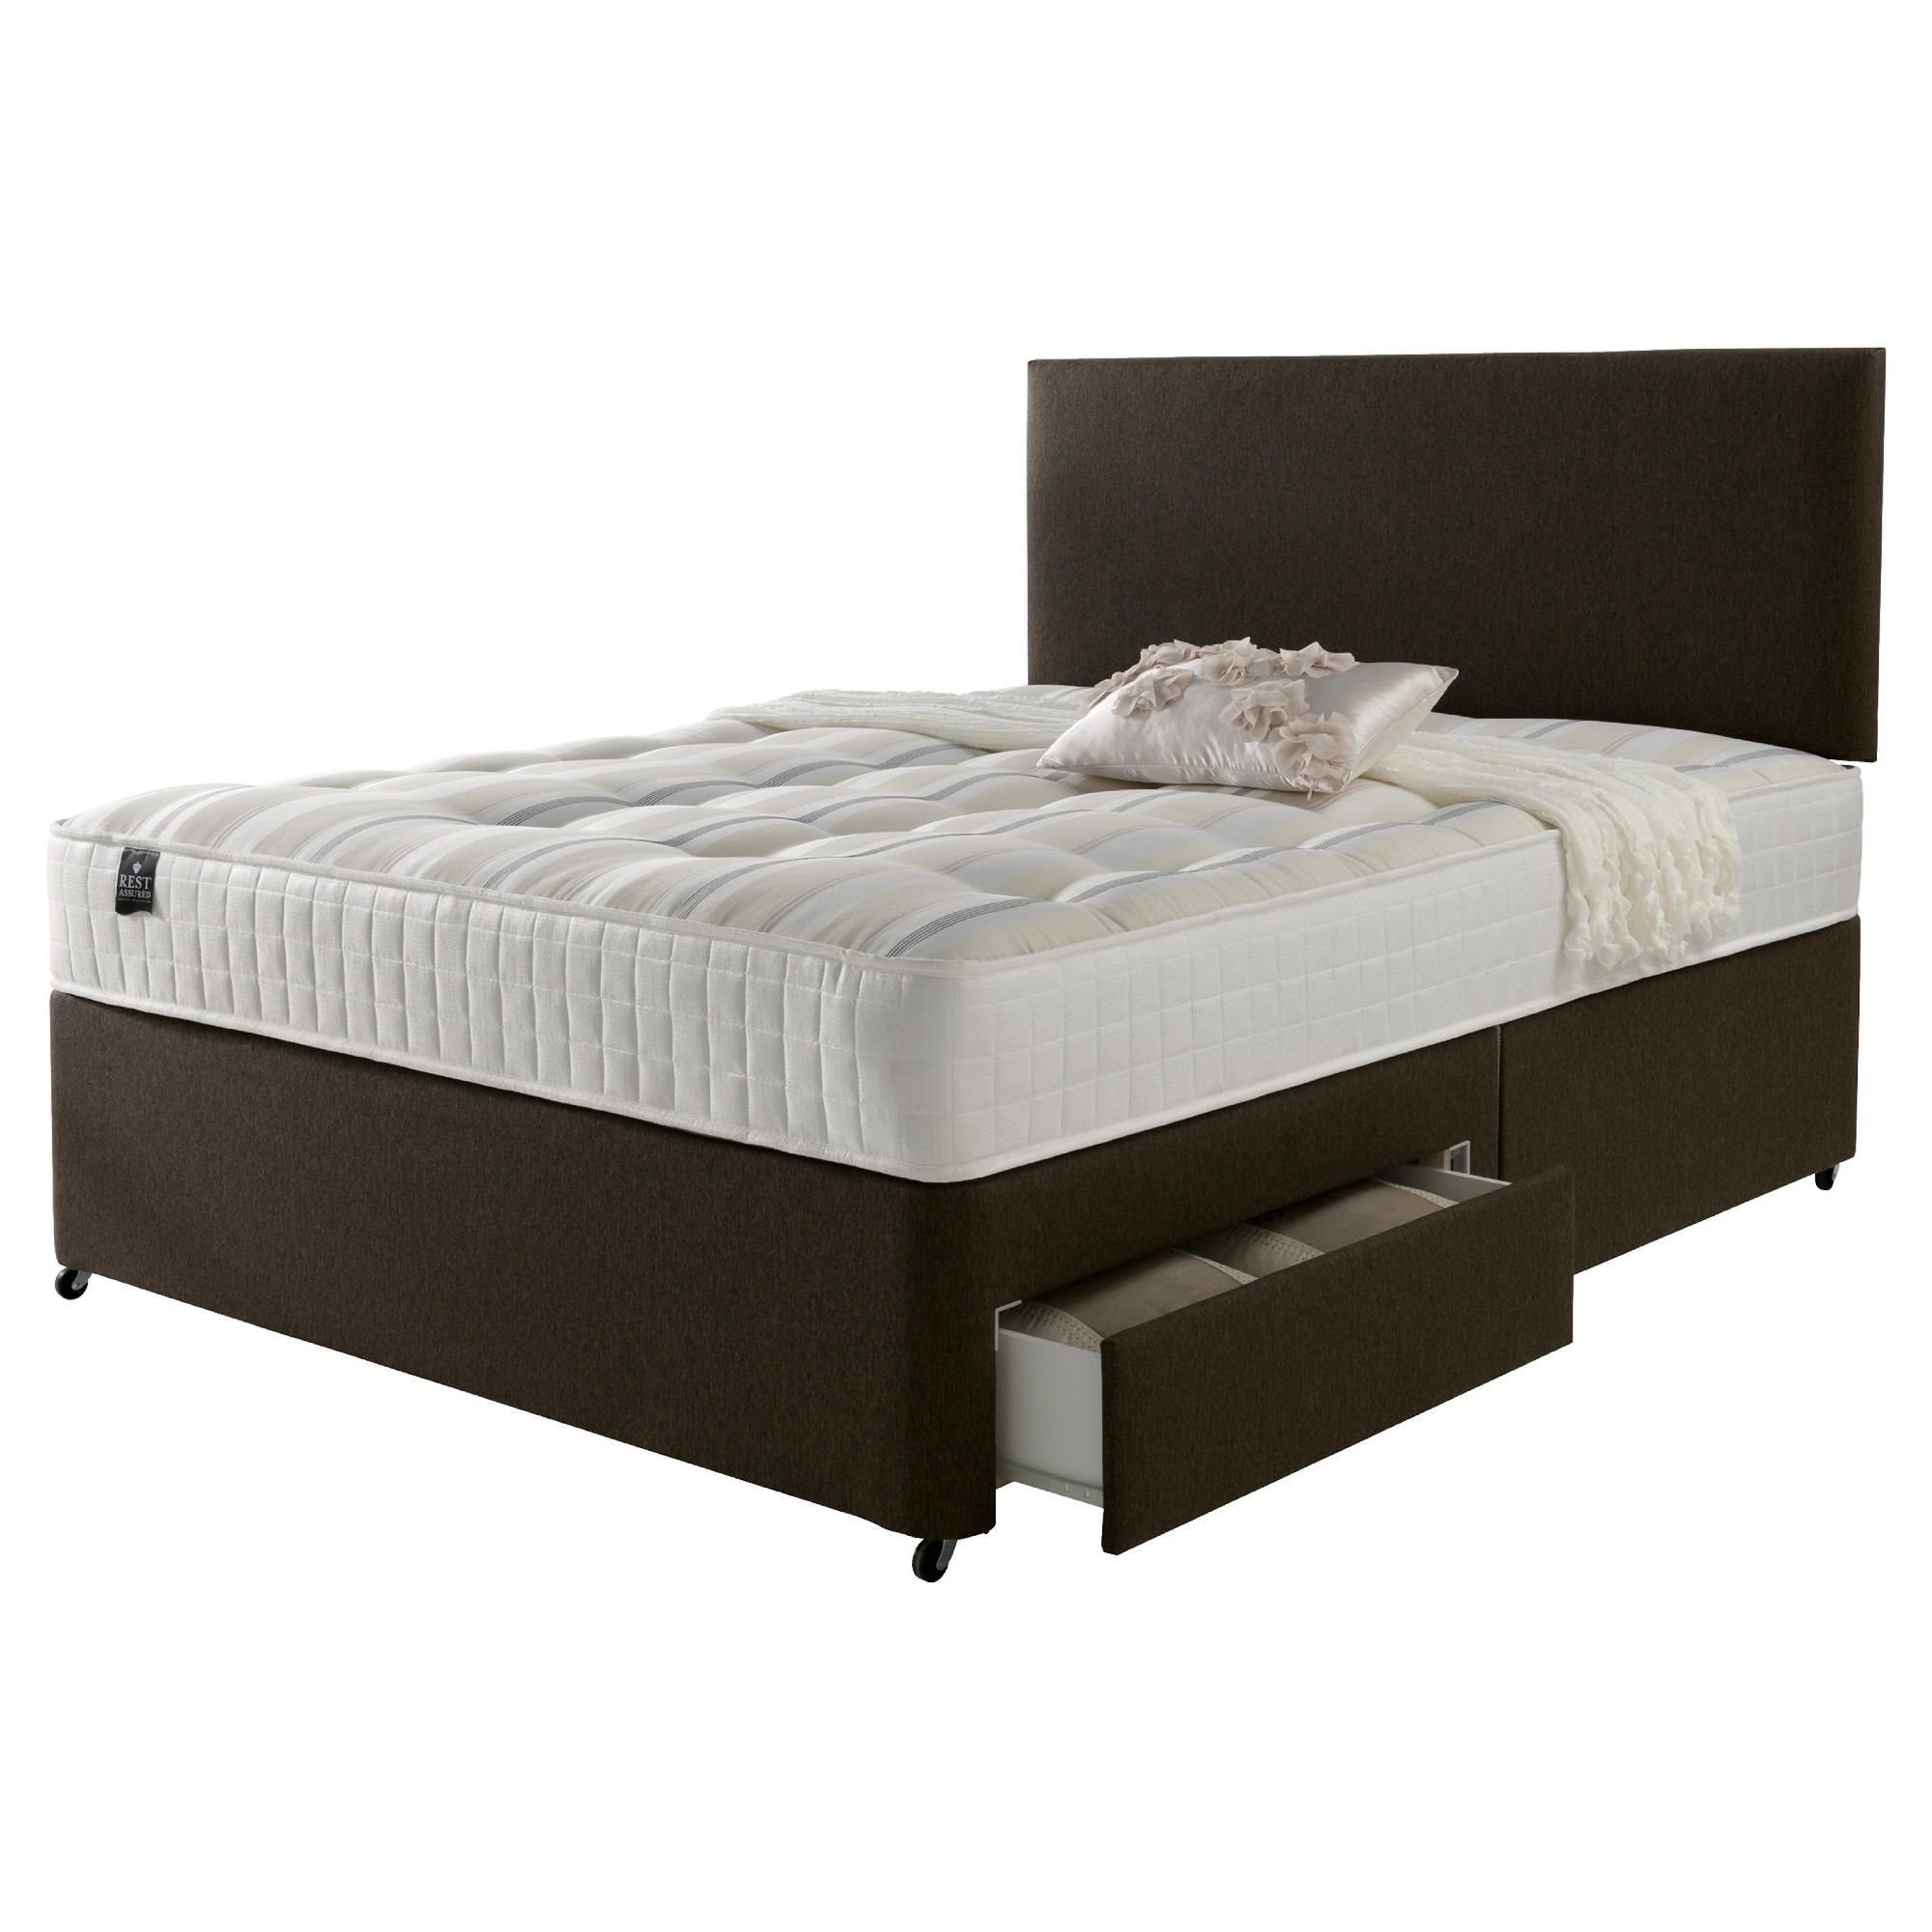 Rest Assured Ortho 2 Drawer Double Divan and Headboard Chestnut at Tesco Direct